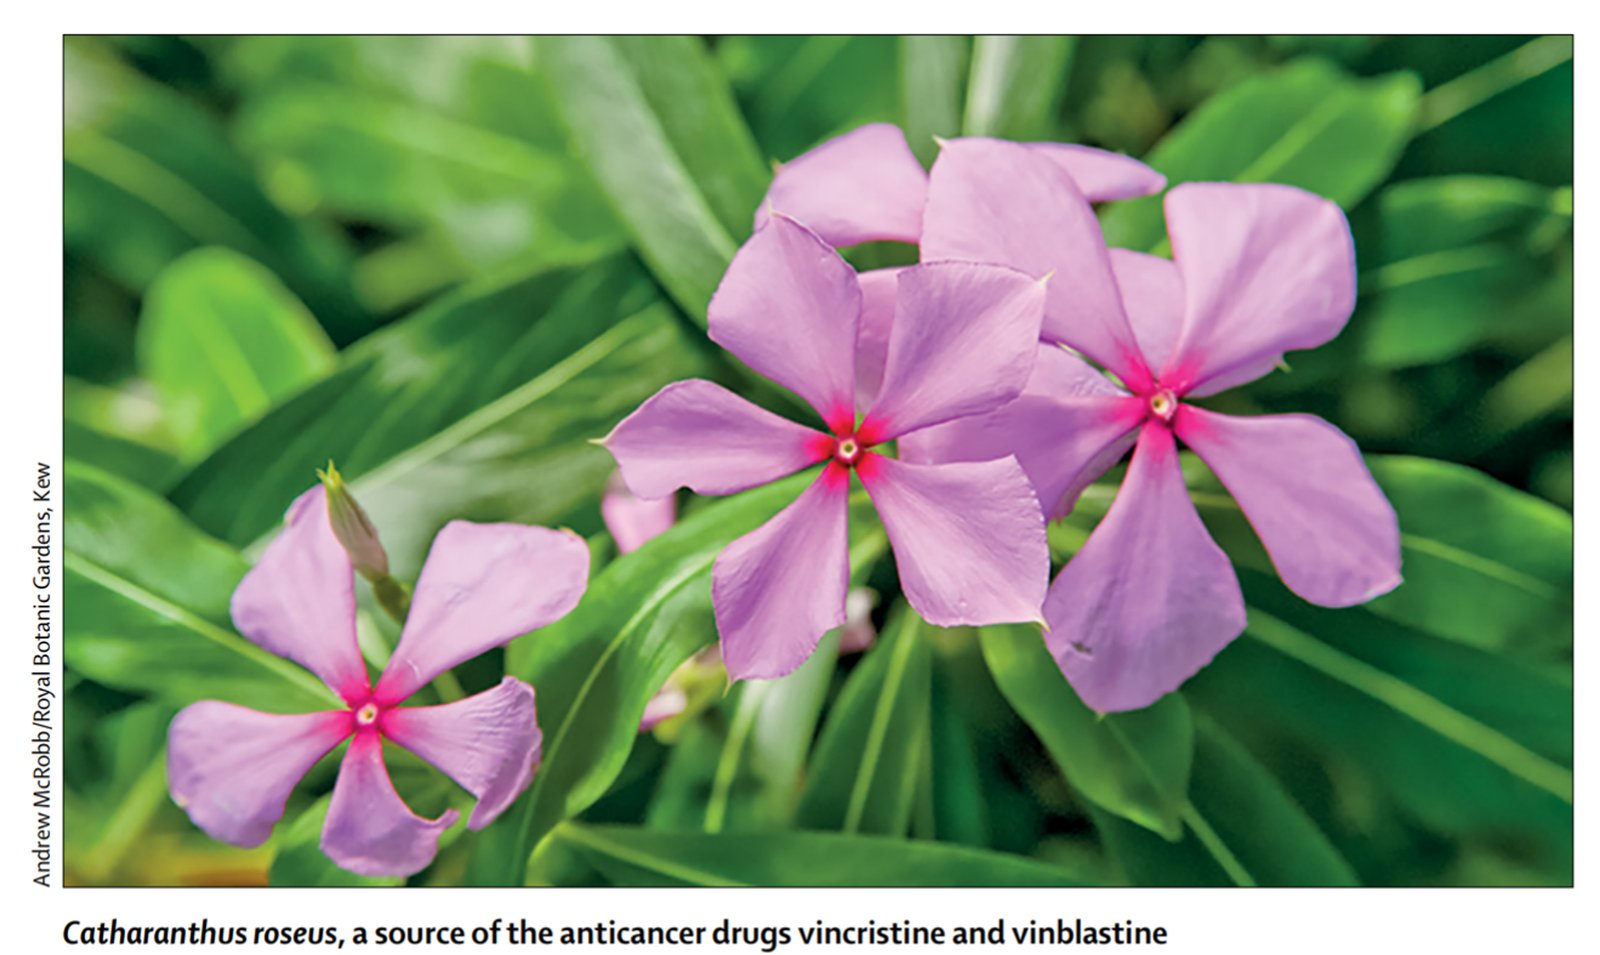 The evolution of anticancer drug discovery from plants